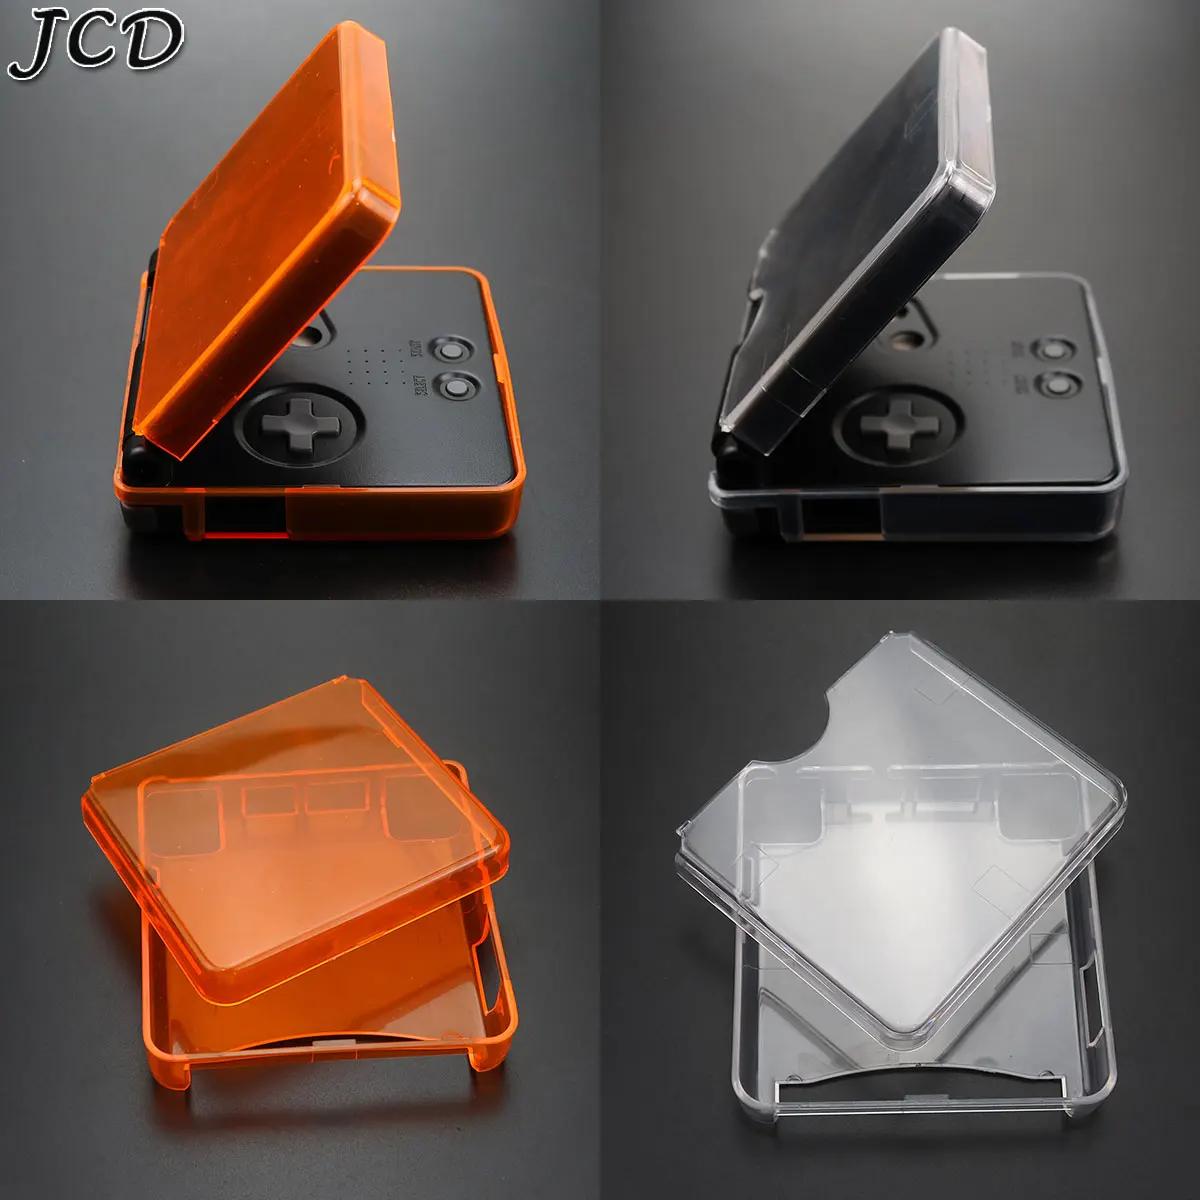 

JCD Clear Protective Cover Case Shell Housing For Gameboy Advance SP for GBA SP Game Console Crystal Cover Case